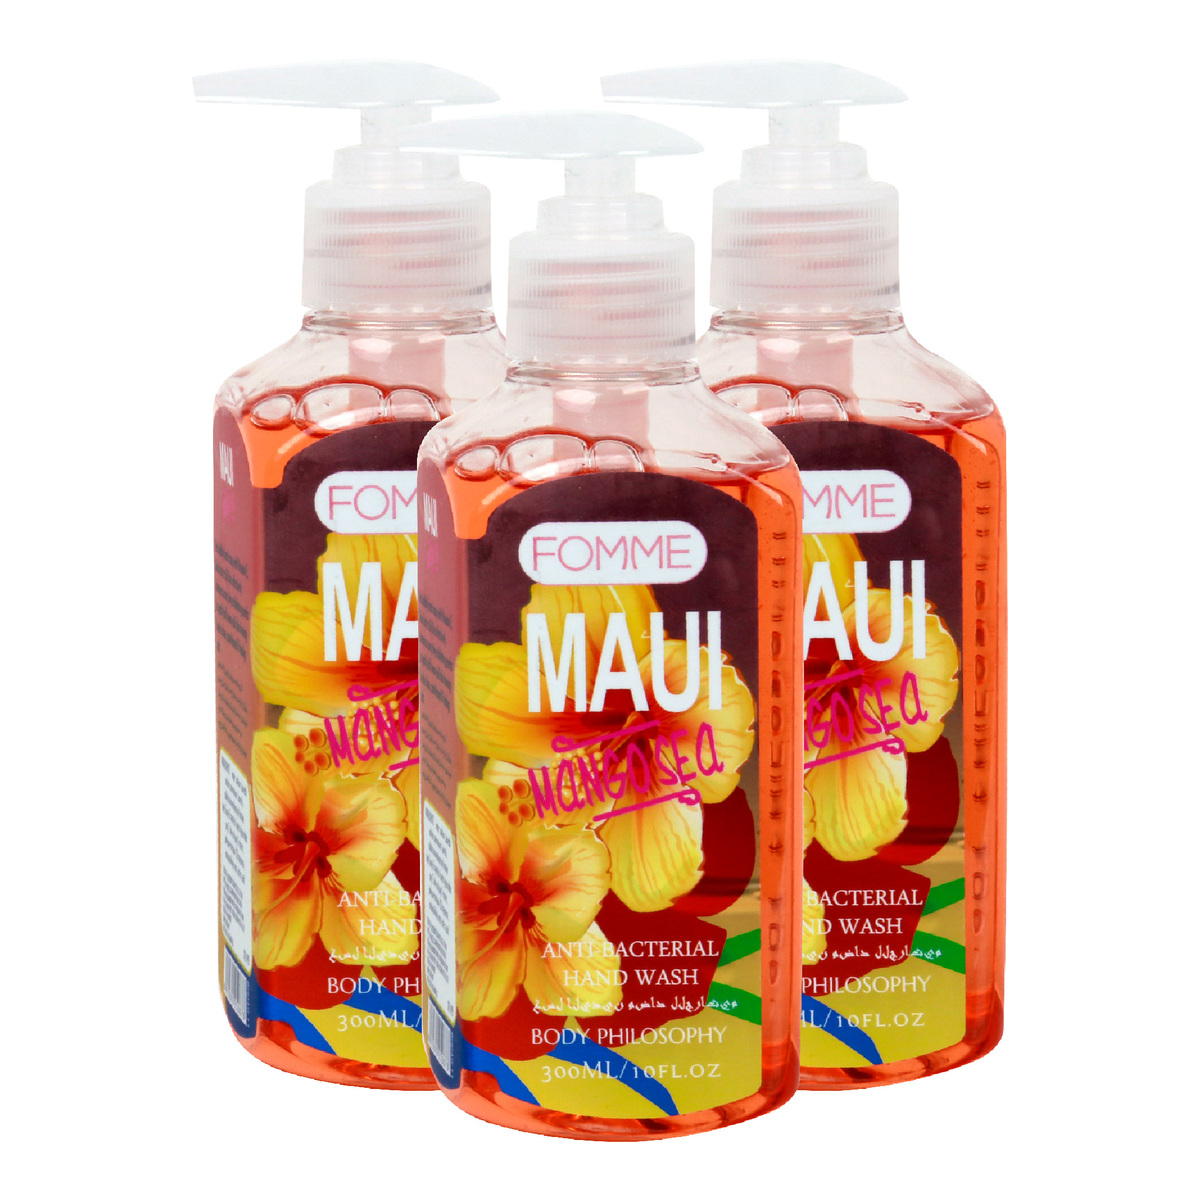 Fomme Anti-Bacterial Handwash Assorted 3 x 300ml